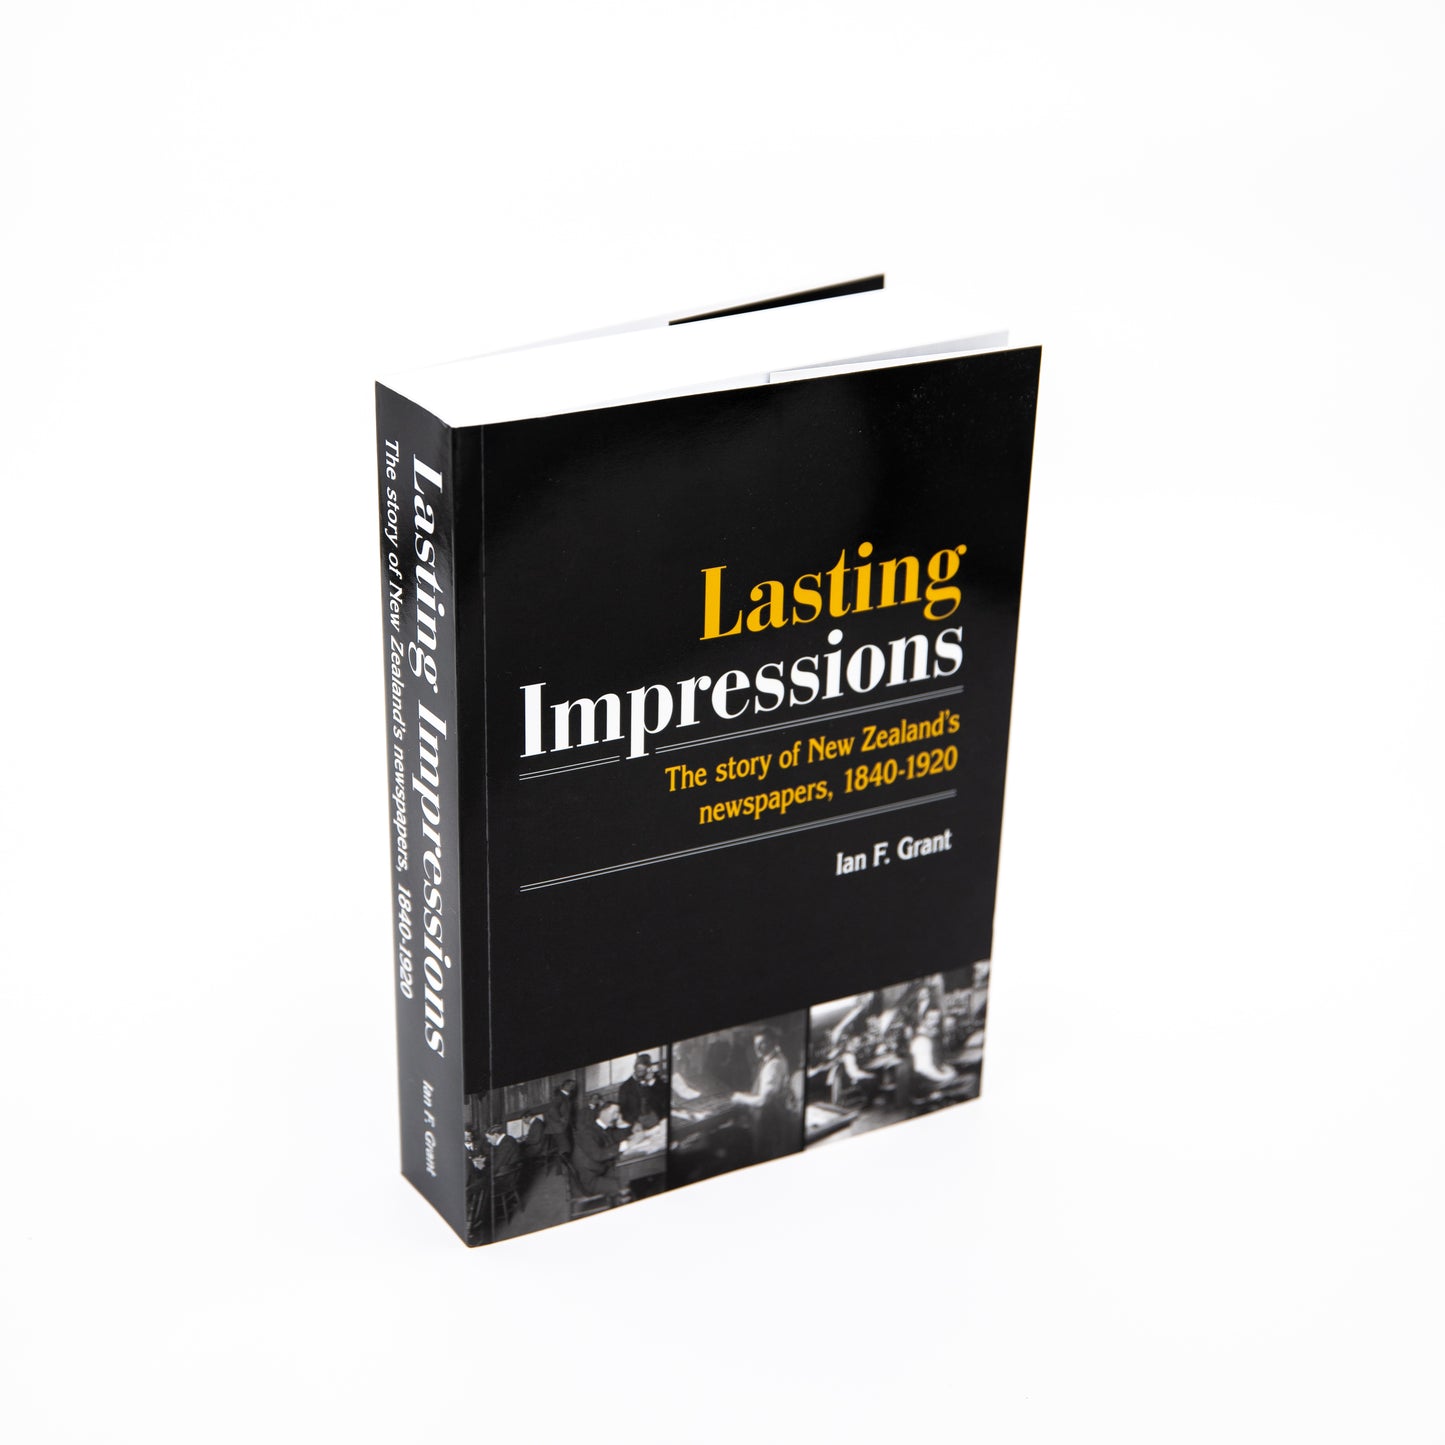 Lasting Impressions: The Story of New Zealand's Newspapers - Ian F. Grant